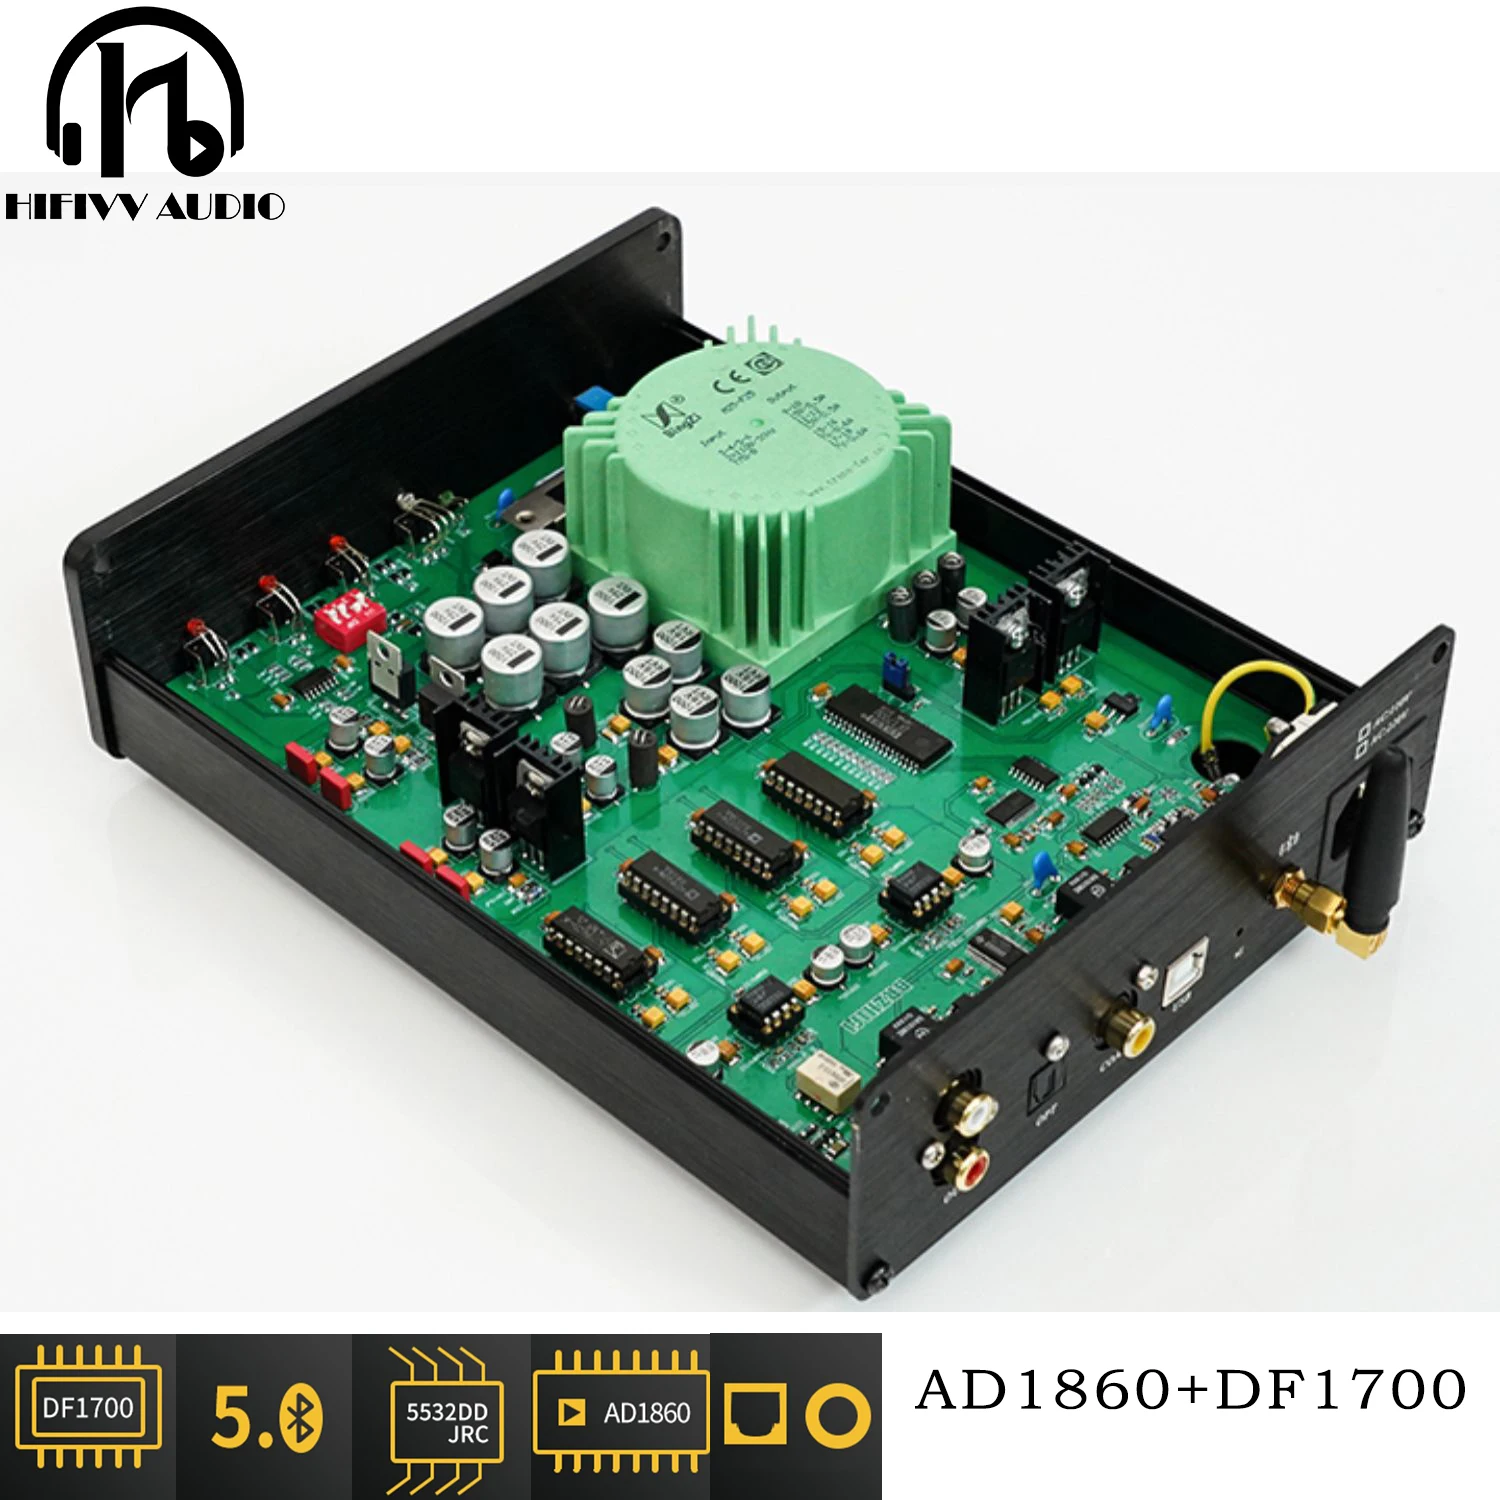 Bluetooth 5.0 PCM56 AD1860 DF1700 Audio Decoder DAC For HiFi Home Amplifier System With USB Fiber Optic And Coaxial Input